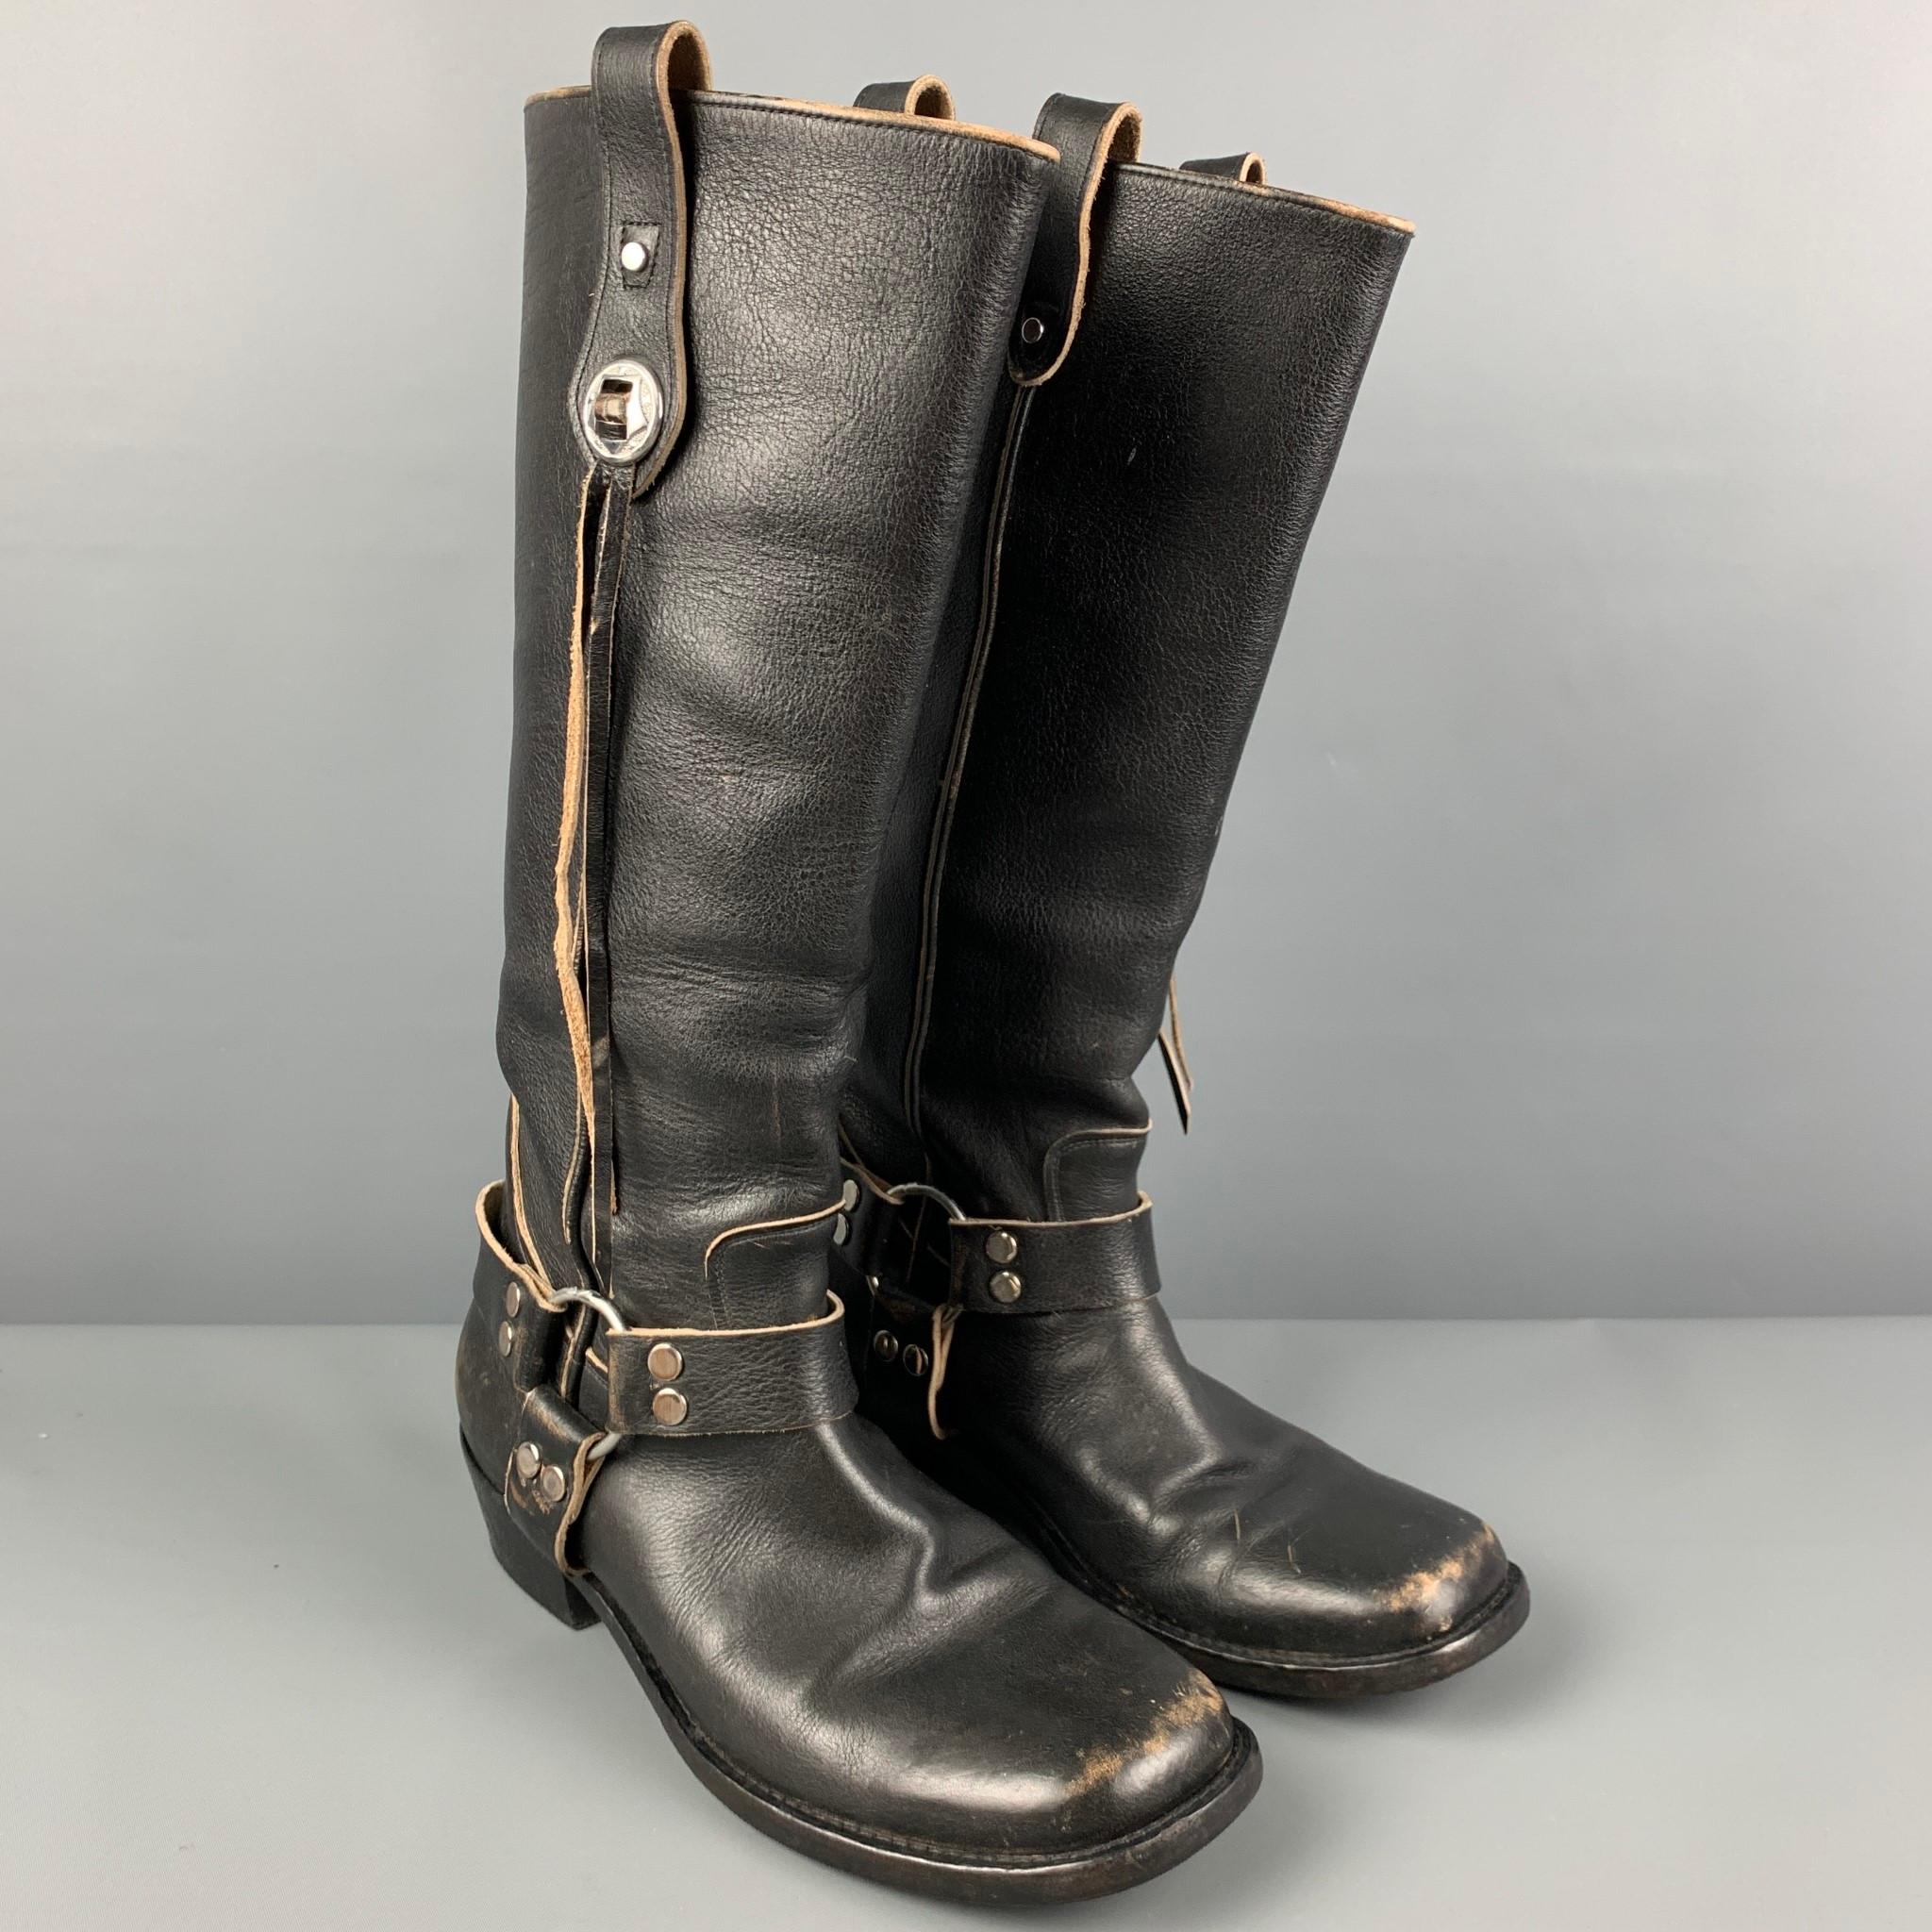 BALENCIAGA boots comes in a black distressed leather featuring a western style, silver tone hardware, square toe, and a chunky heel. Includes box. Made in Italy. 

Good Pre-Owned Condition. Light wear. As-is.
Marked: 44788 39.5
Original Retail